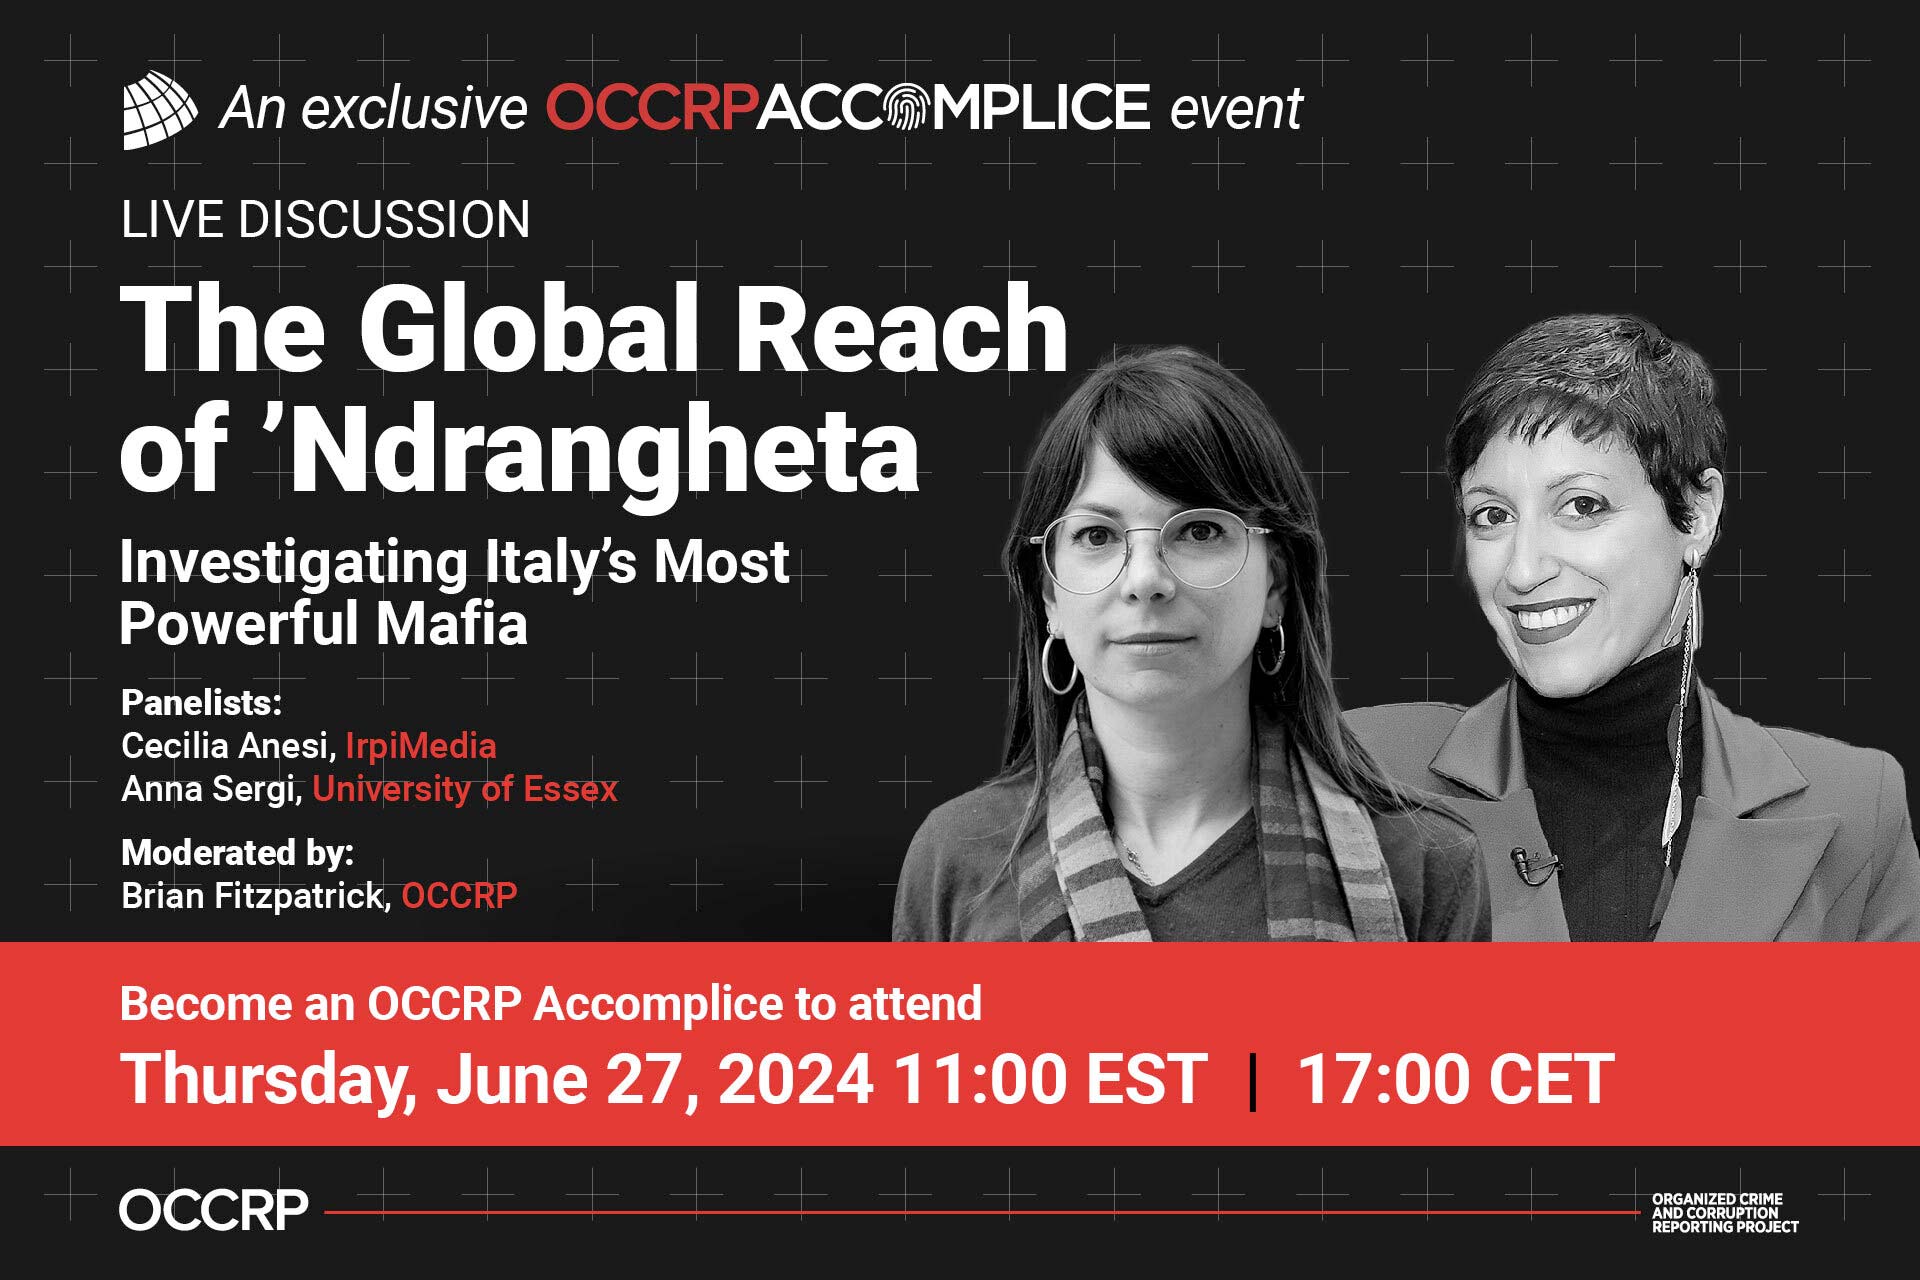 The Global Reach of the ‘Ndrangheta: Join a Virtual Discussion About Italy’s Most Powerful Mafia